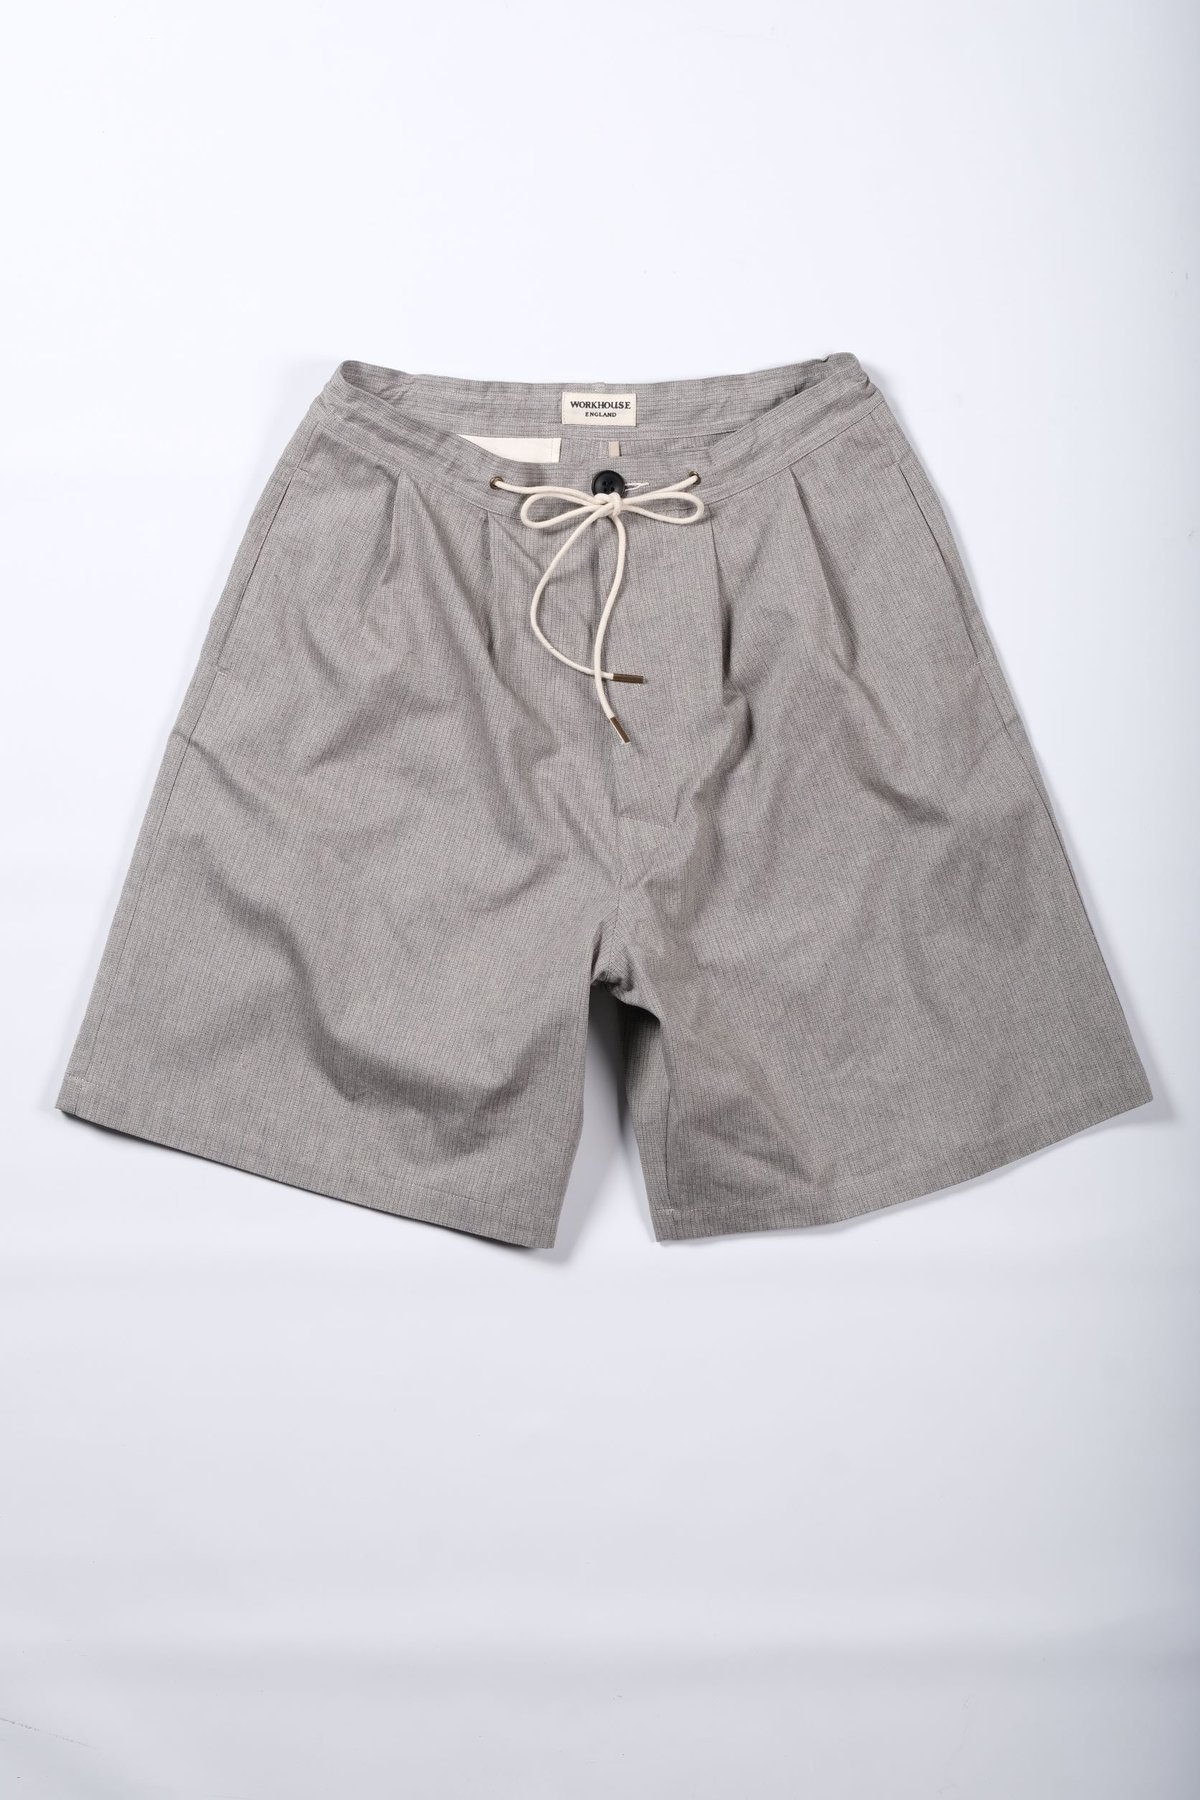 Image of ORBAL WIDE SHORT in Grey linen/cotton mix £185.00